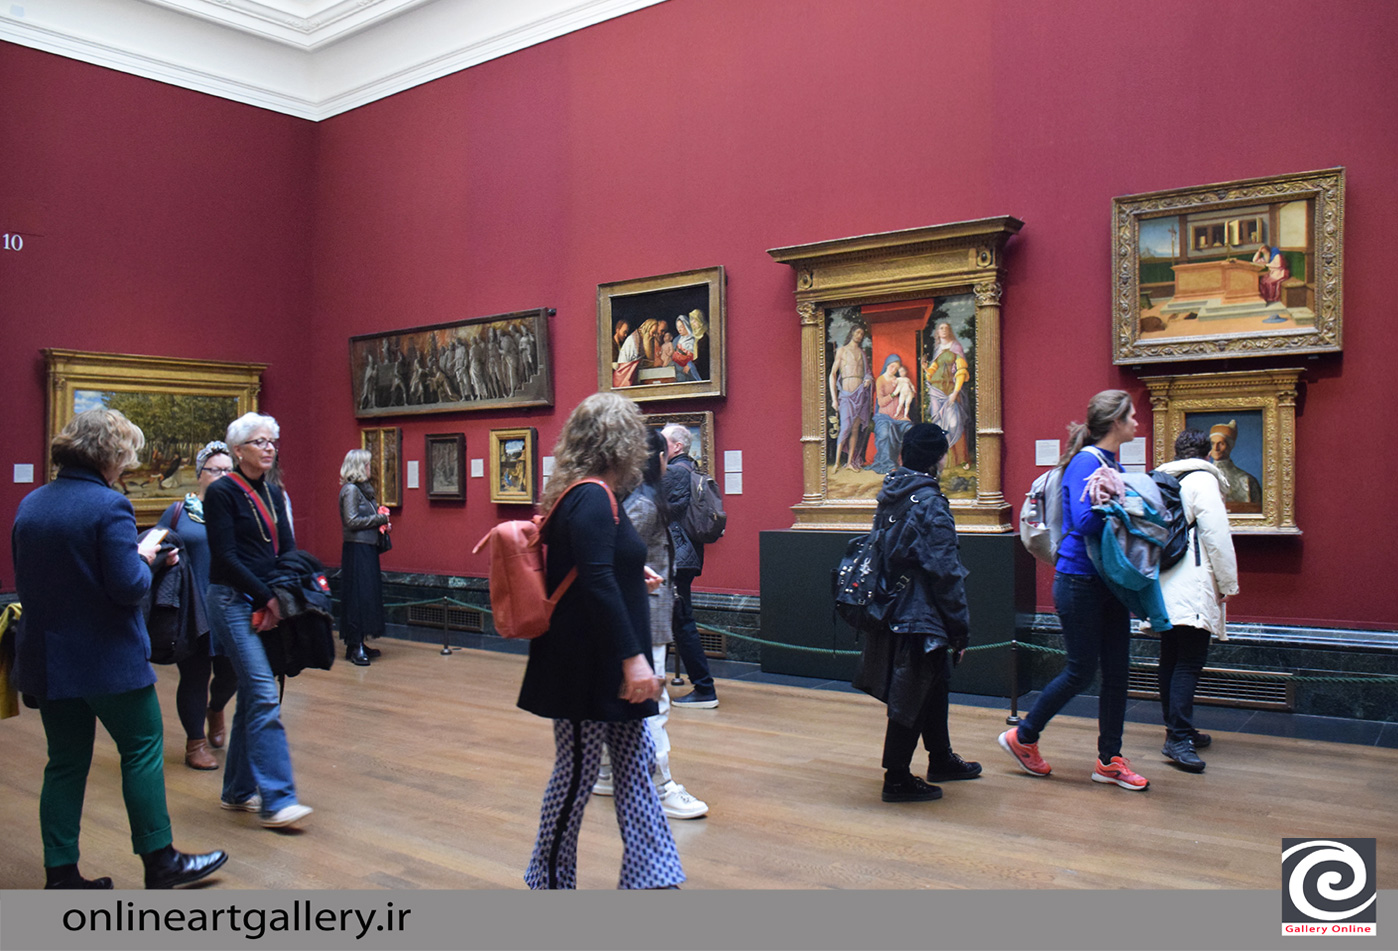 Visiting the National Gallery in London